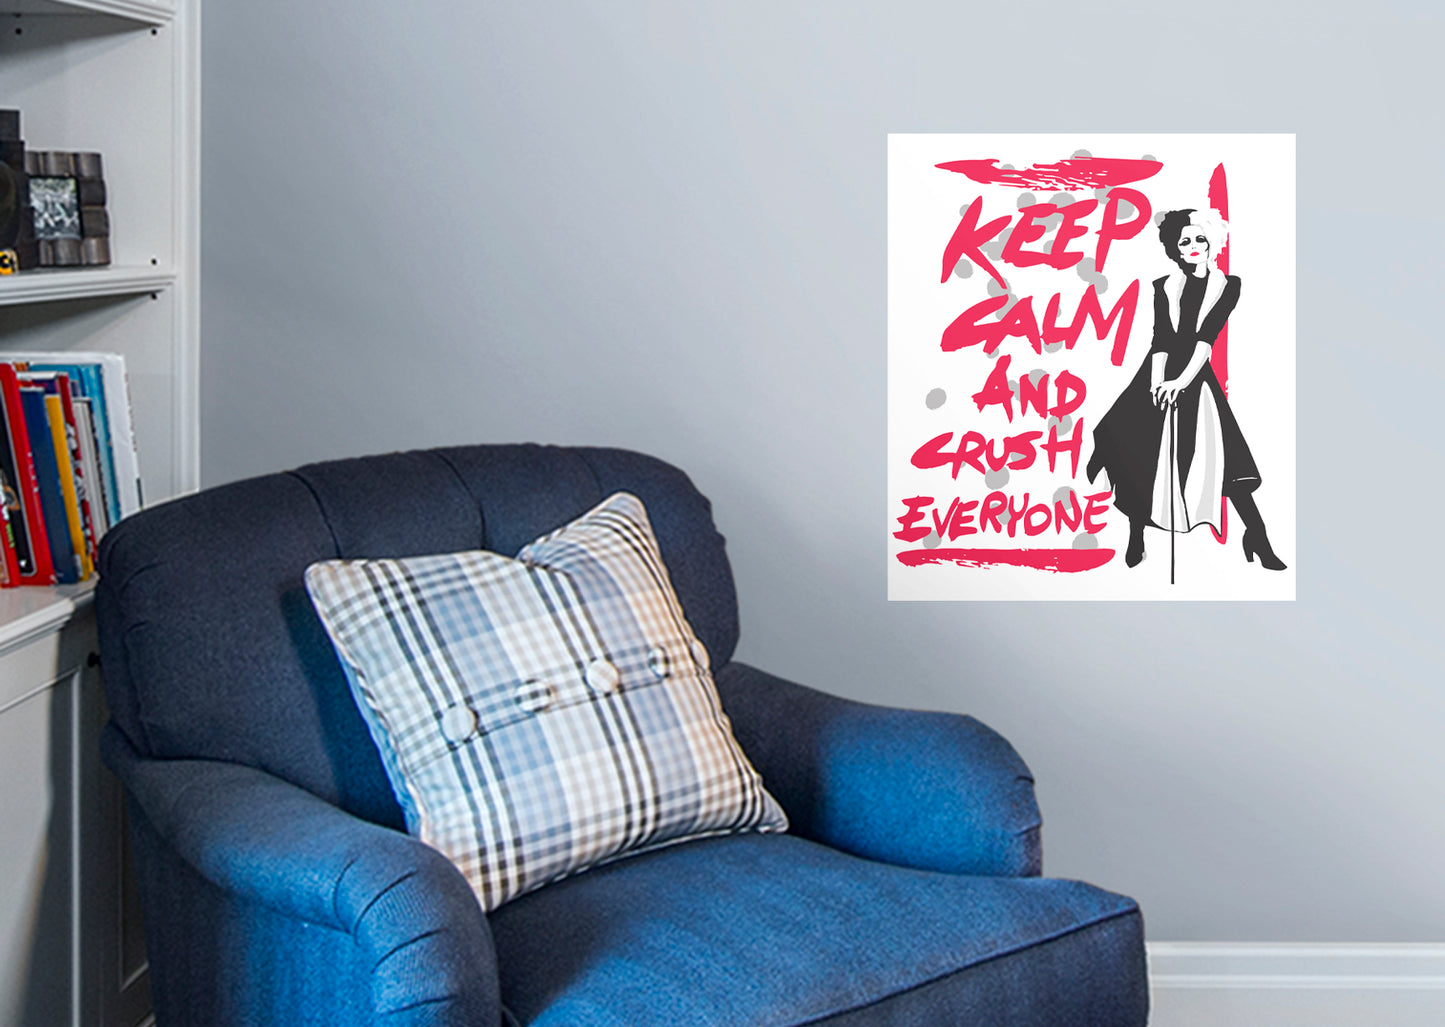 Cruella Movie:  Keep Calm Mural        - Officially Licensed Disney Removable Wall   Adhesive Decal